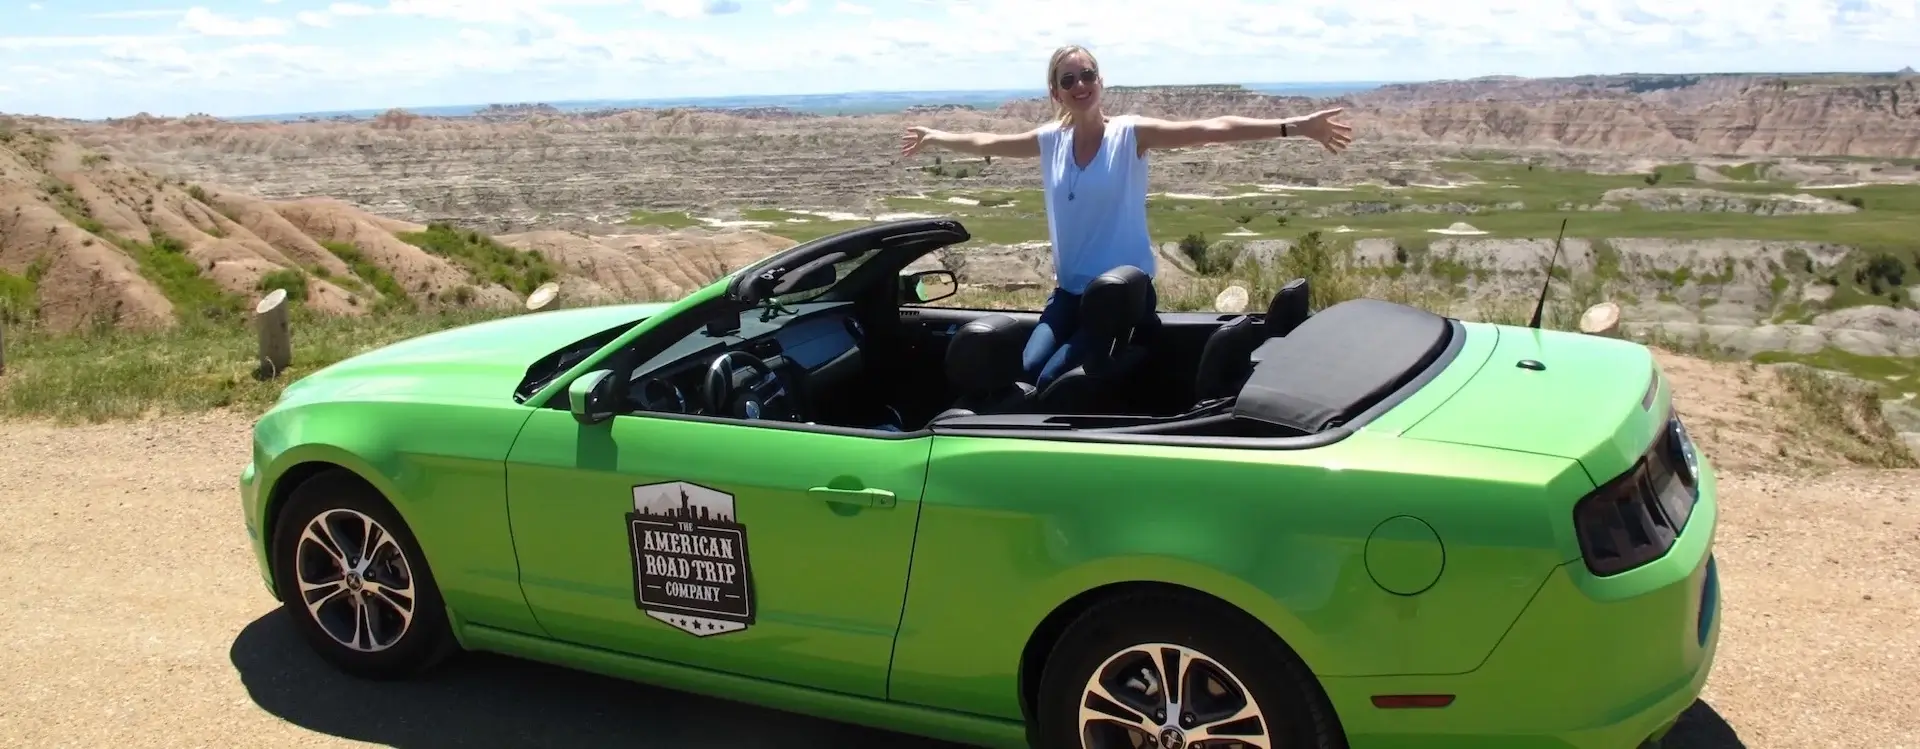 Corinne, North America Travel Expert, in her Mustang on an American Road Trip